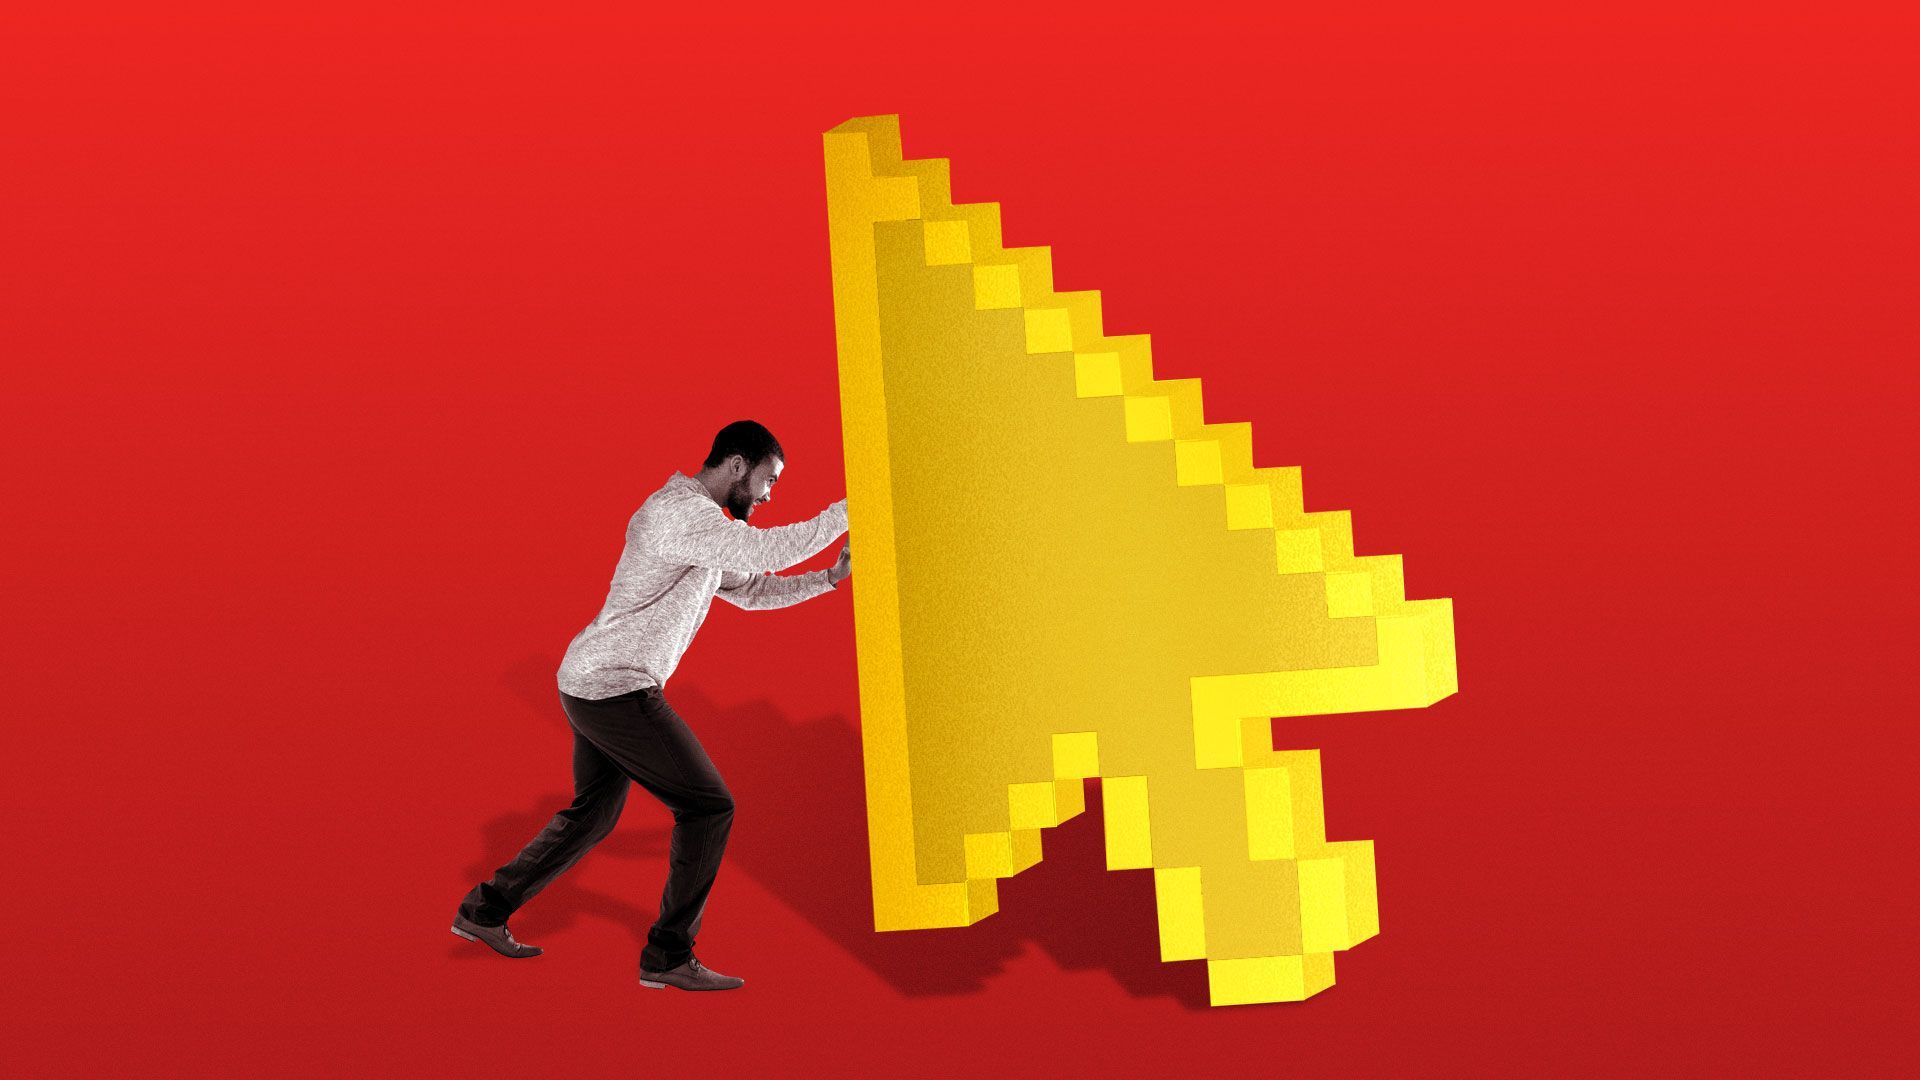 Illustration of person pushing against cursor arrow